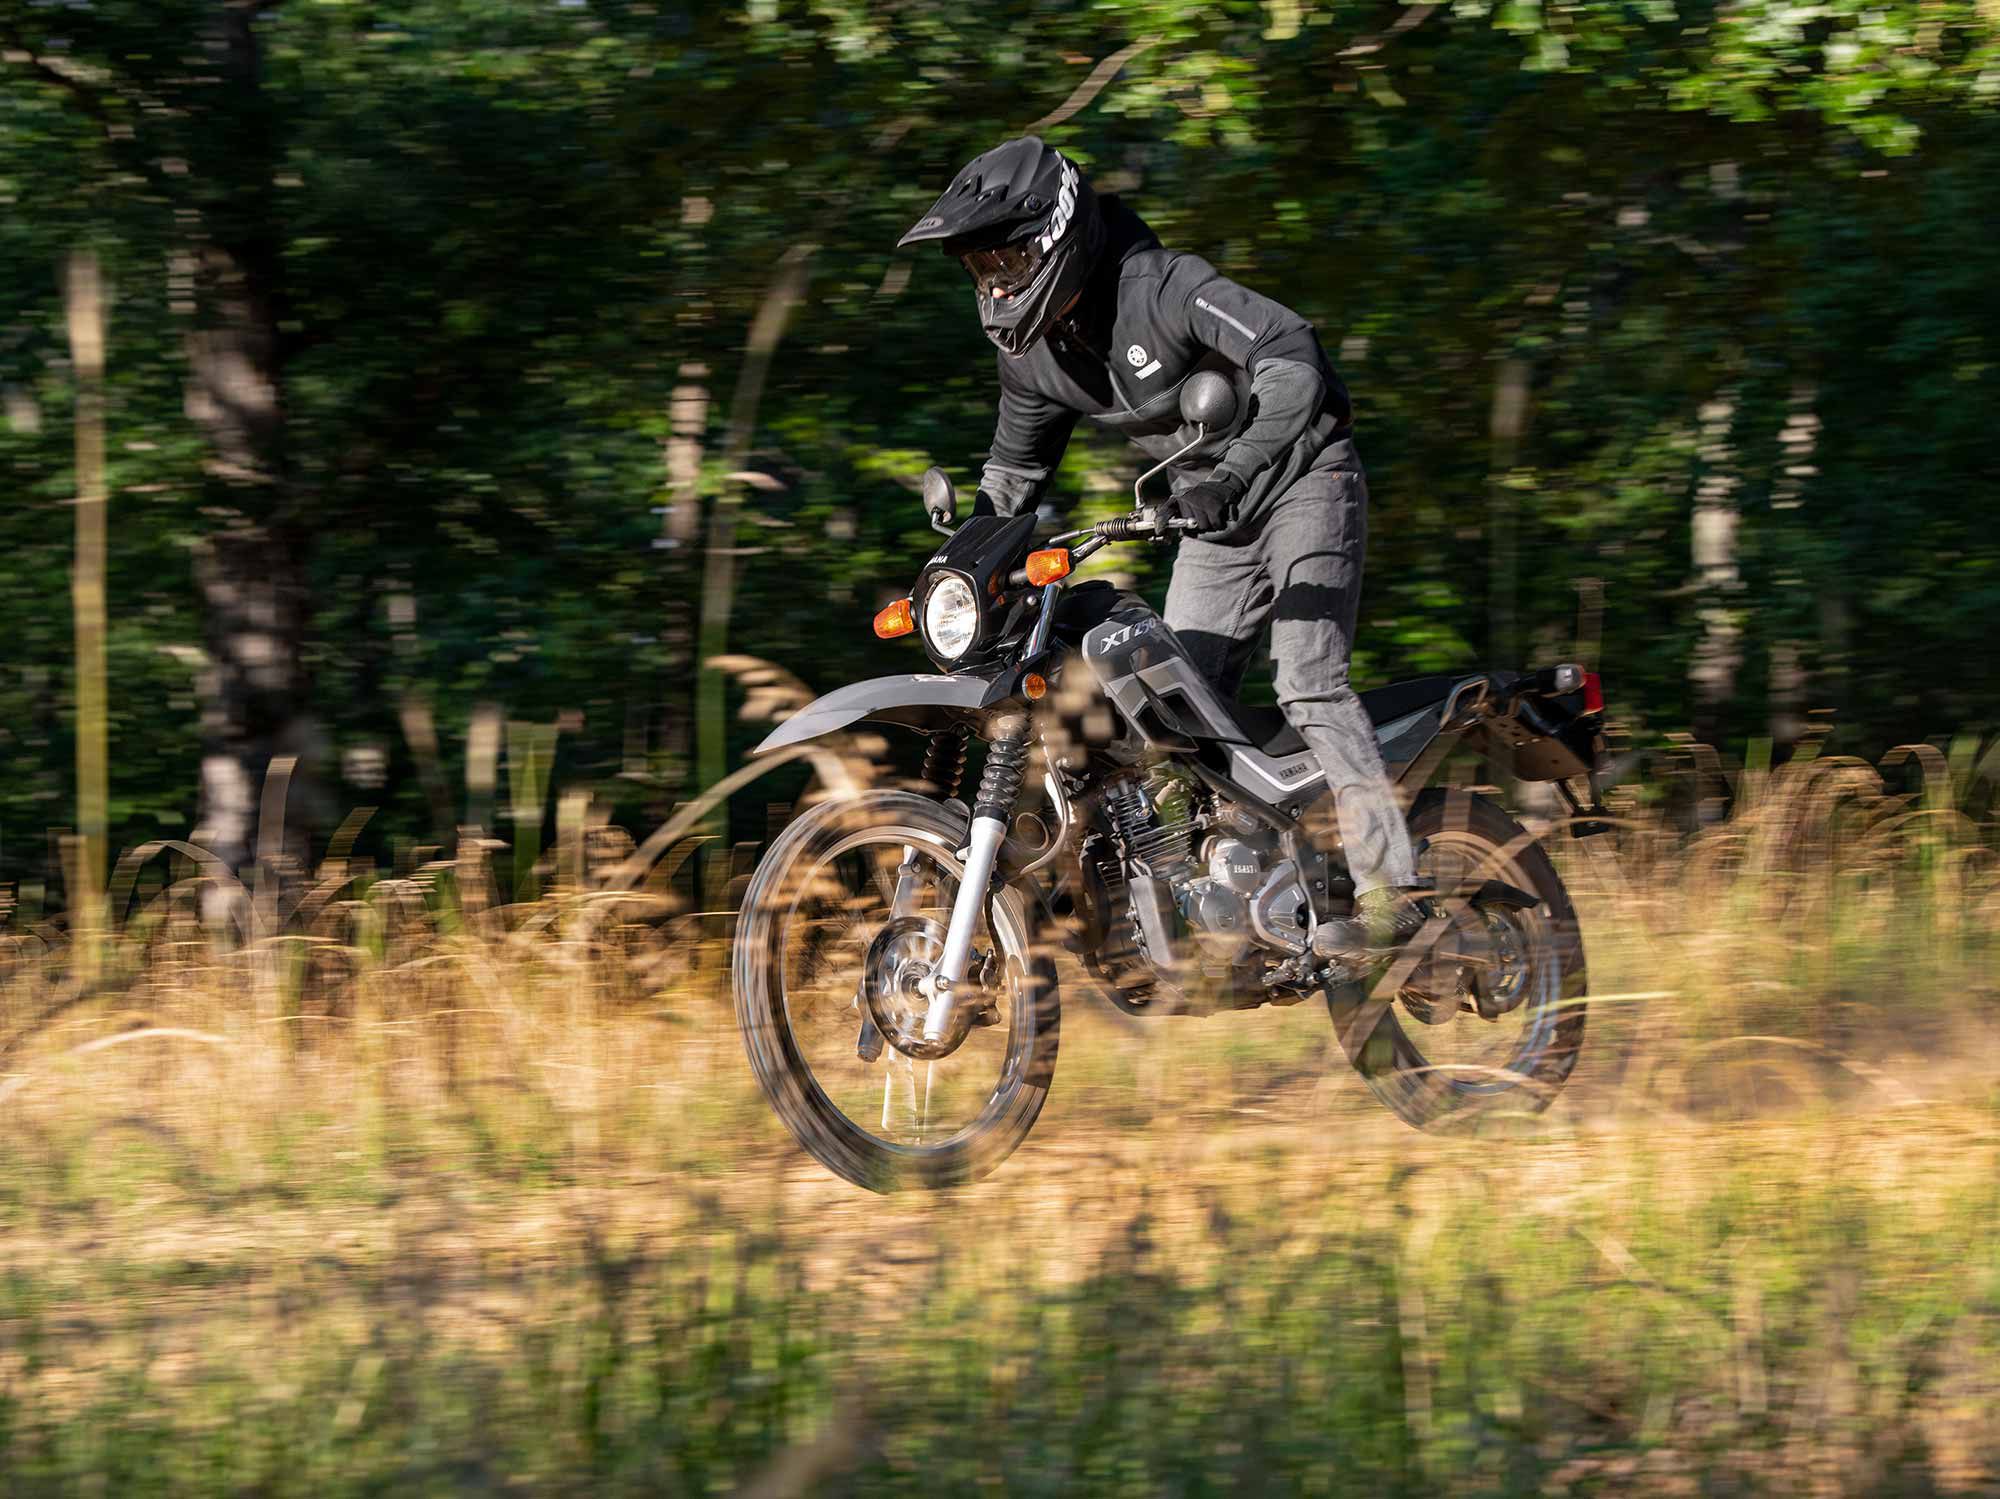 The Yamaha XT250 returns with no appearance changes.